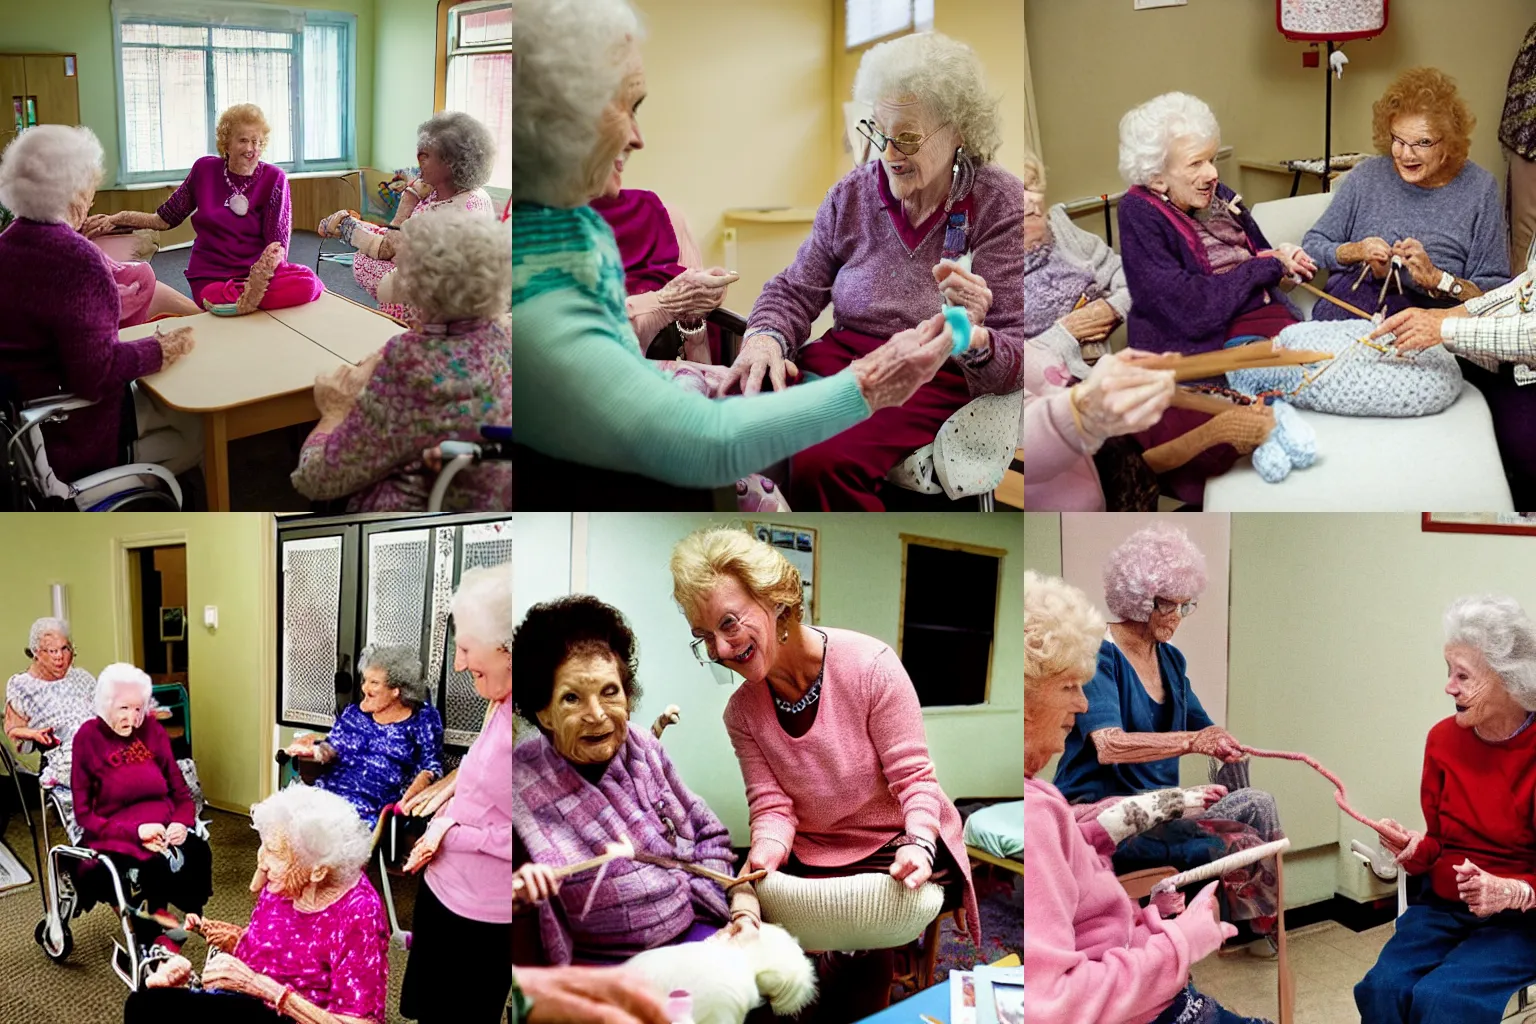 Prompt: Diamond Dallas Page teaching knitting to old ladies in a nursing home. photo by Steve McCurry